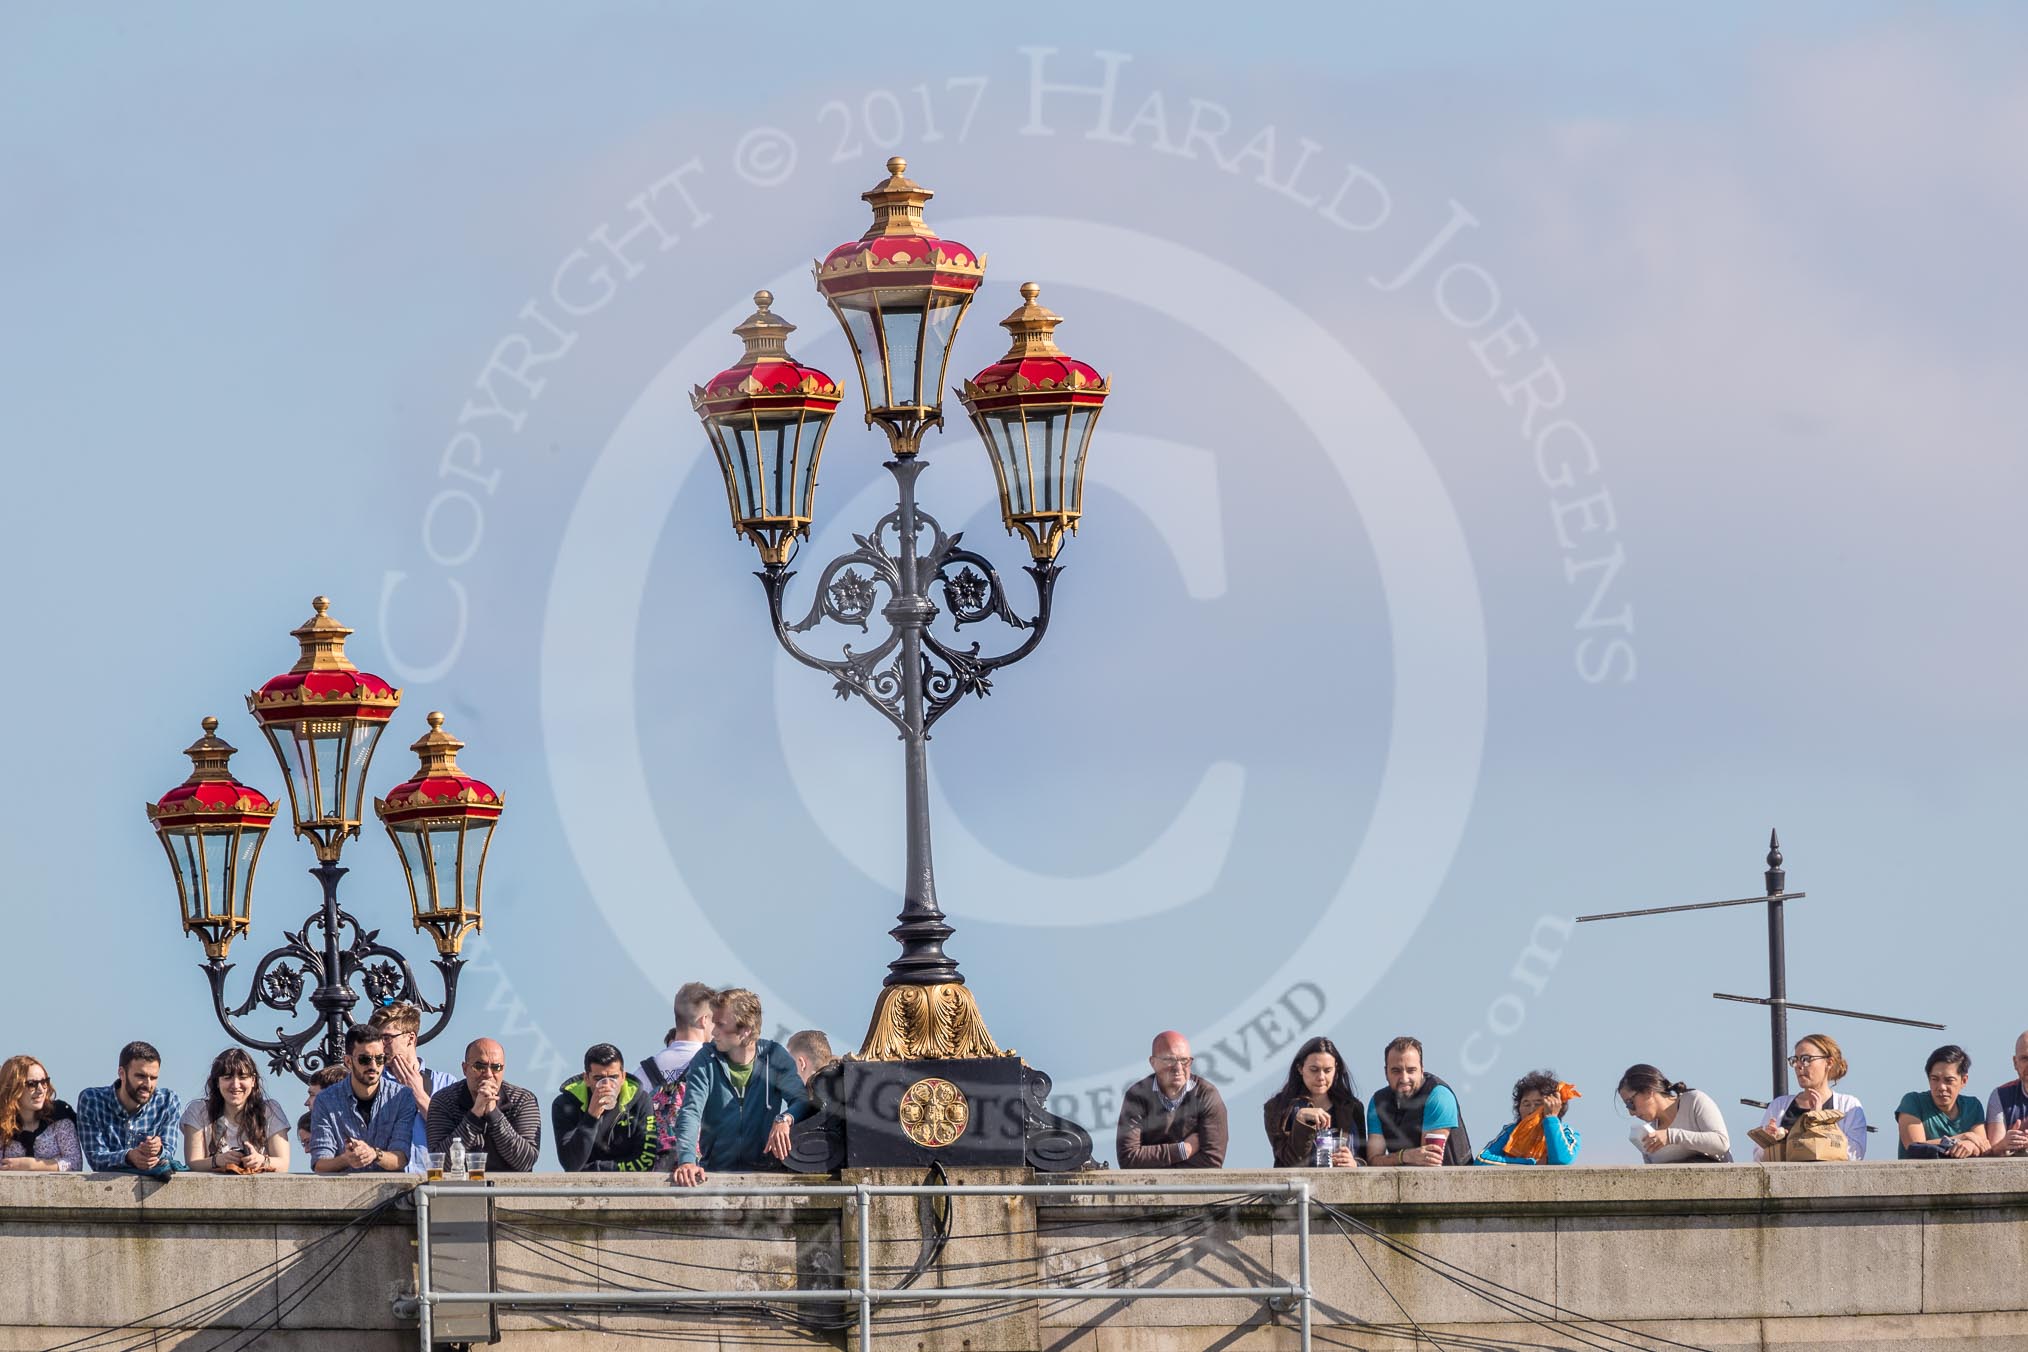 The Boat Race season 2017 -  The Cancer Research Women's Boat Race: Crowds waiting for the start of the Cancer Research Women's Boat Race on Putney Bridge.
River Thames between Putney Bridge and Mortlake,
London SW15,

United Kingdom,
on 02 April 2017 at 16:07, image #99